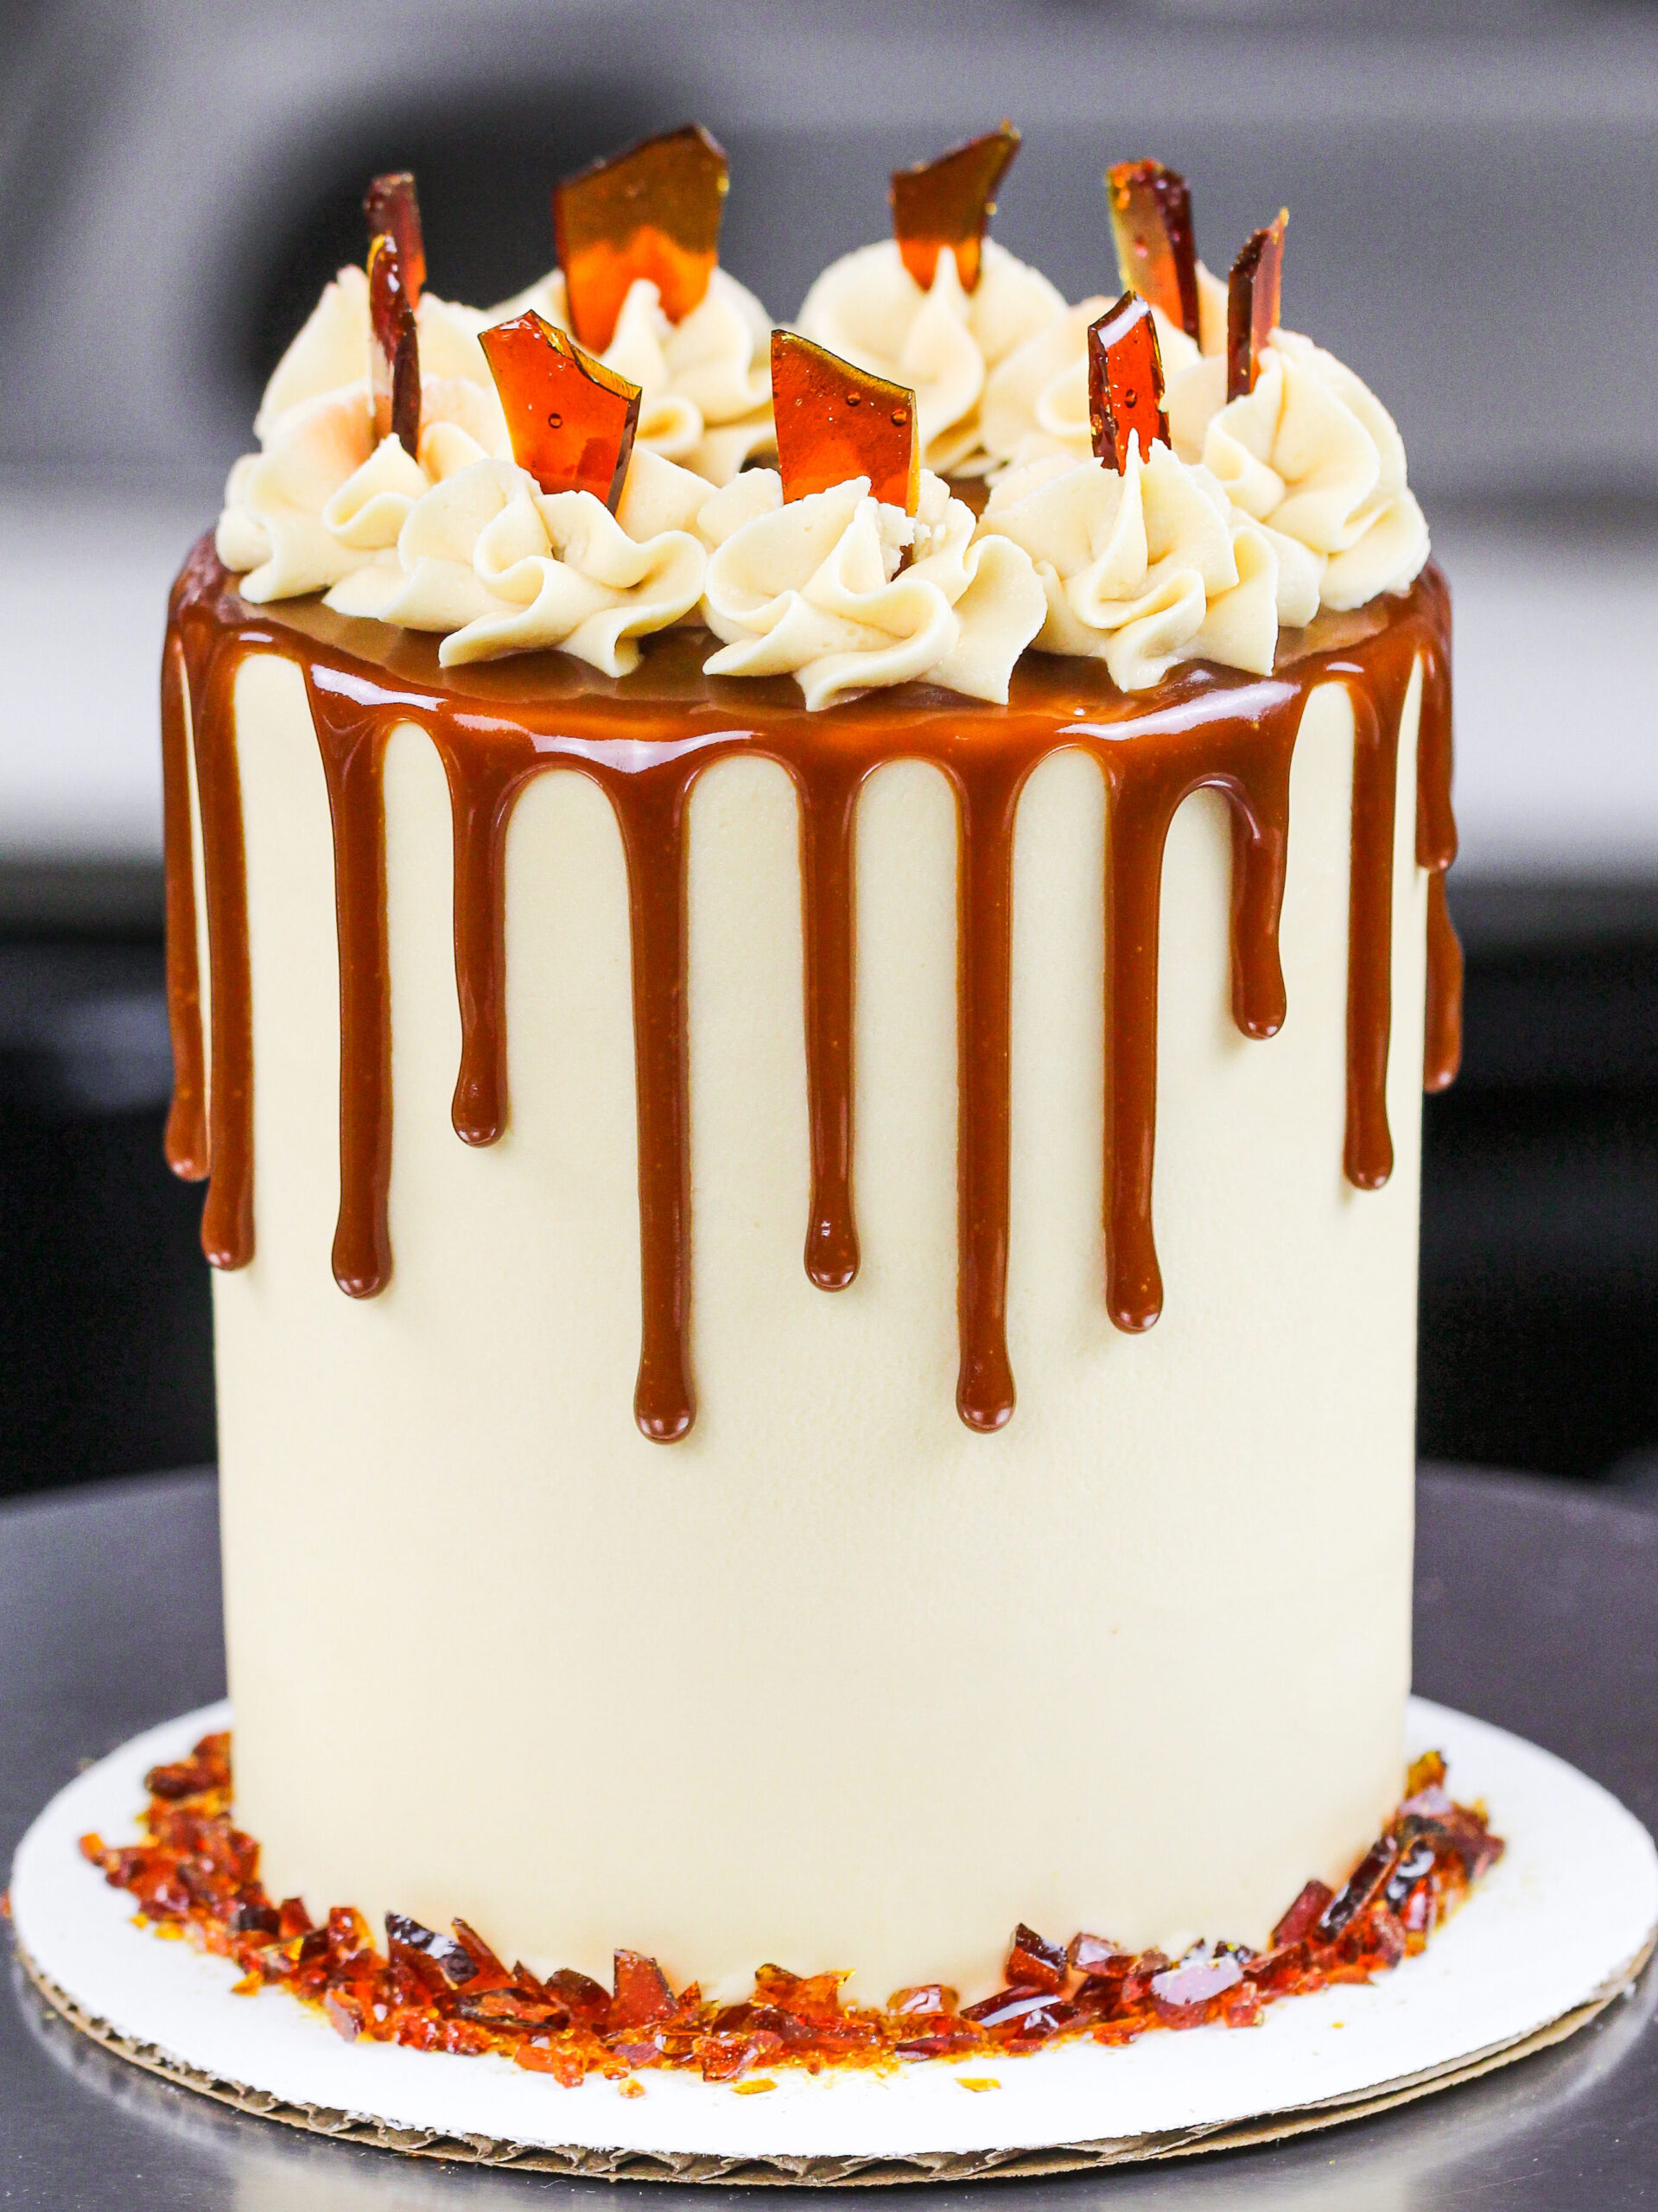 image of a mini brown sugar caramel drip cake made with 4-inch cake layers